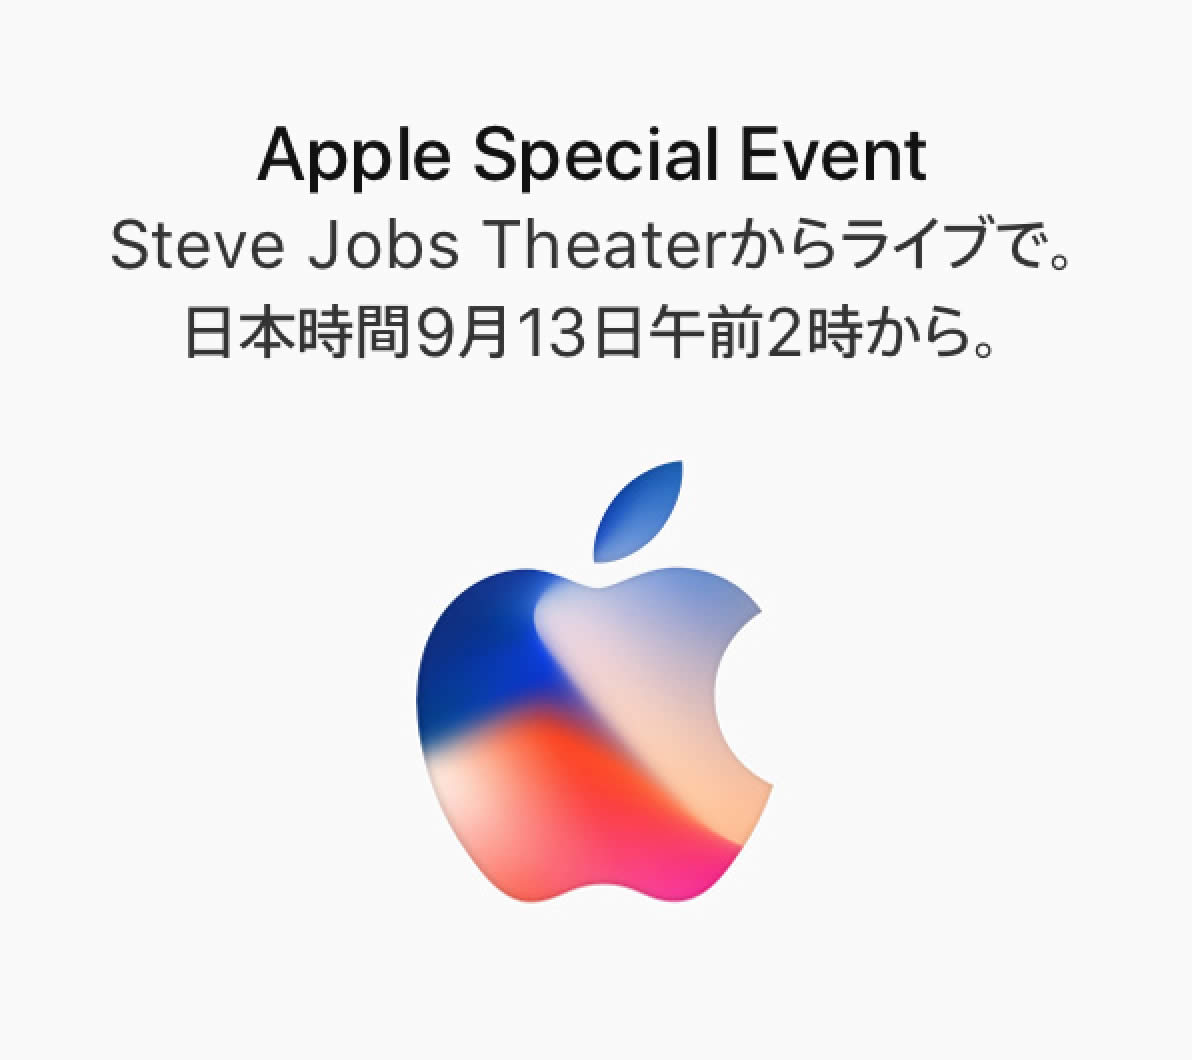 Apple Special Event 2017